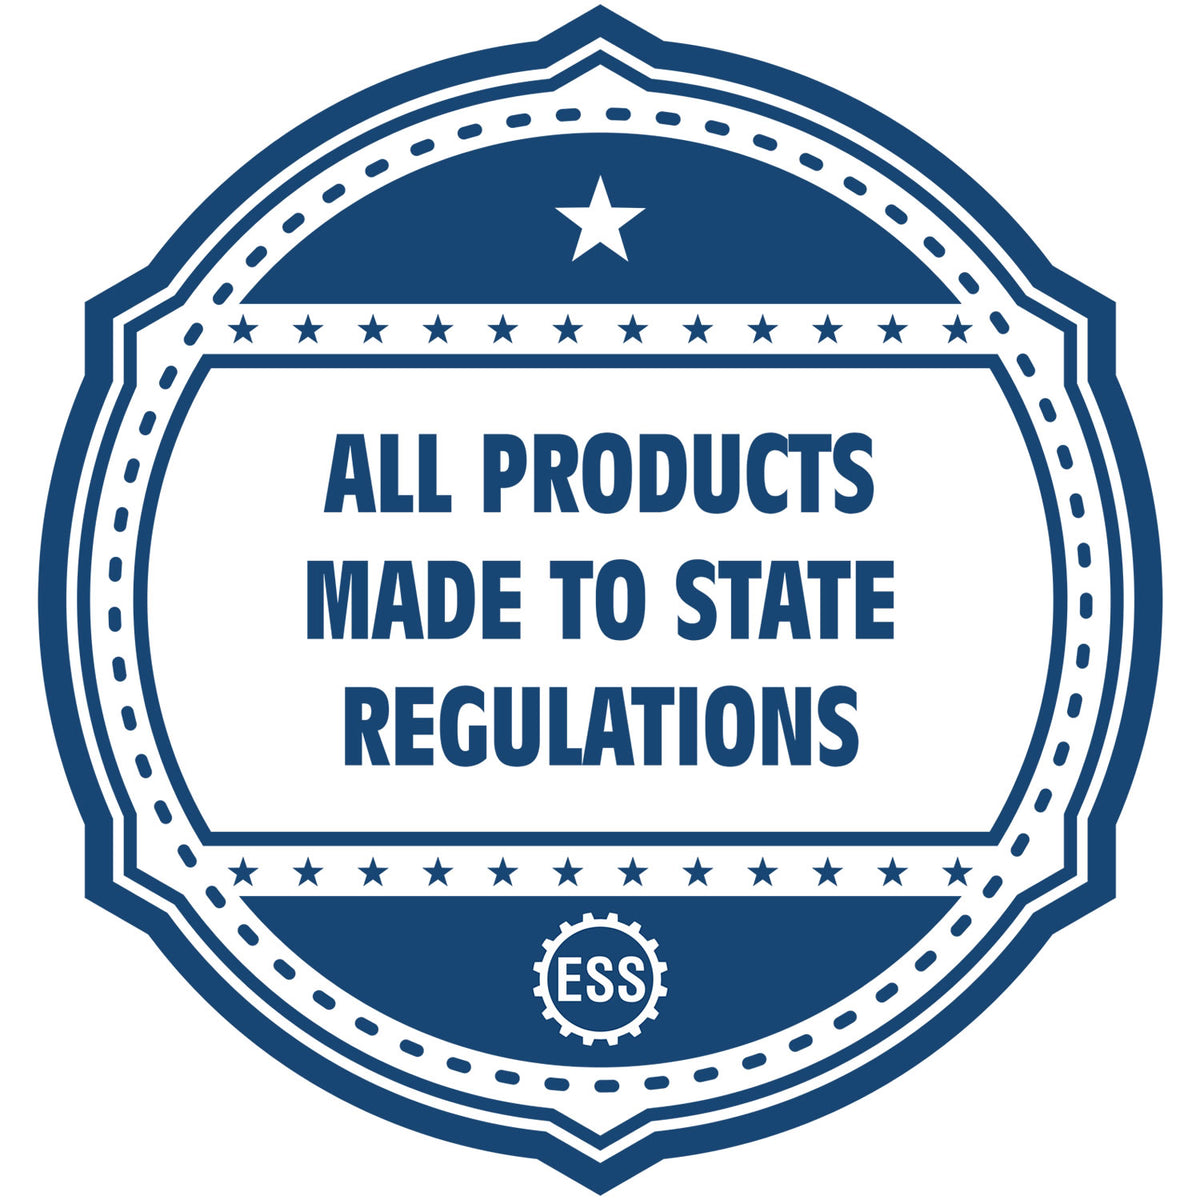 An icon or badge element for the Wooden Handle Maine State Seal Notary Public Stamp showing that this product is made in compliance with state regulations.